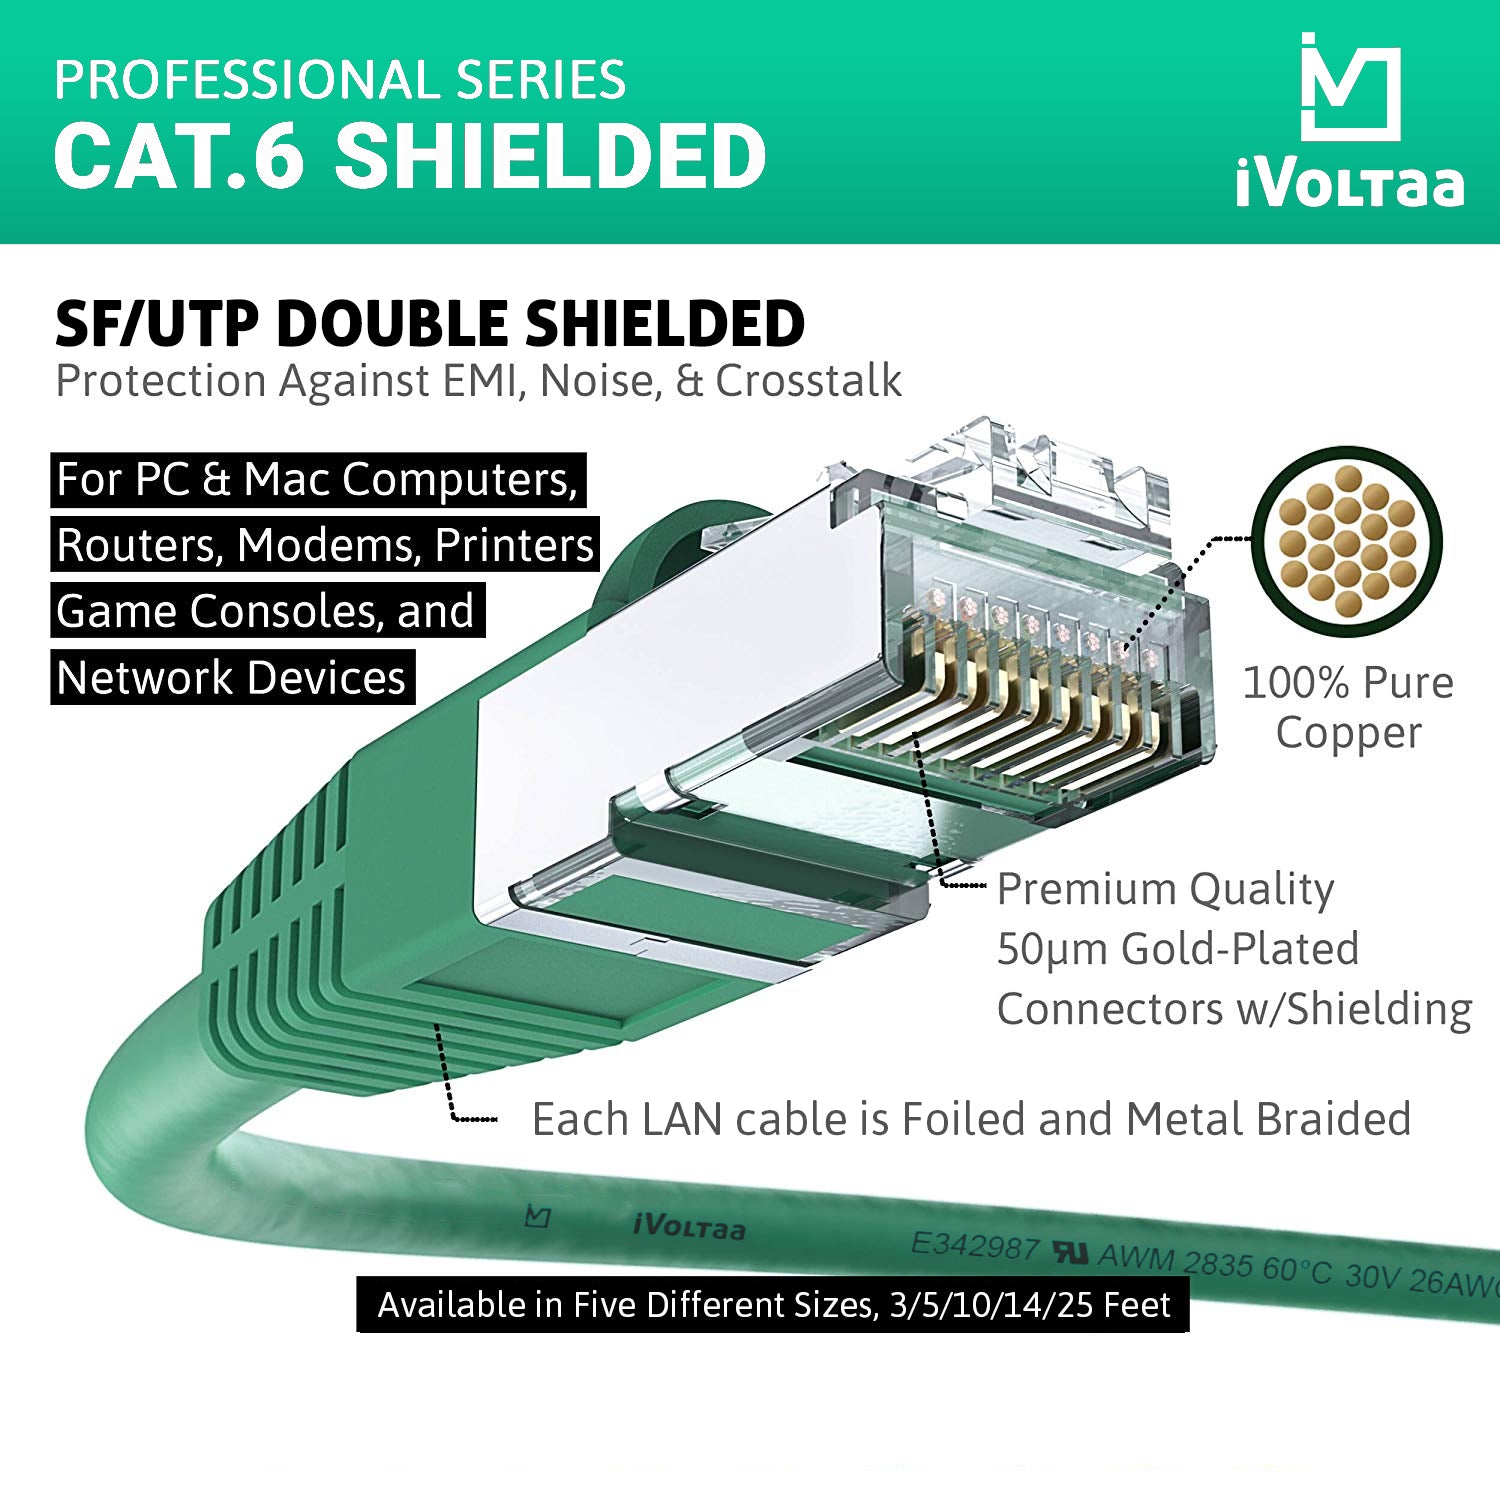 A shield diagram of an iVoltaa Ethernet Cable CAT6A Cable Dual Shielded (SF/UTP)